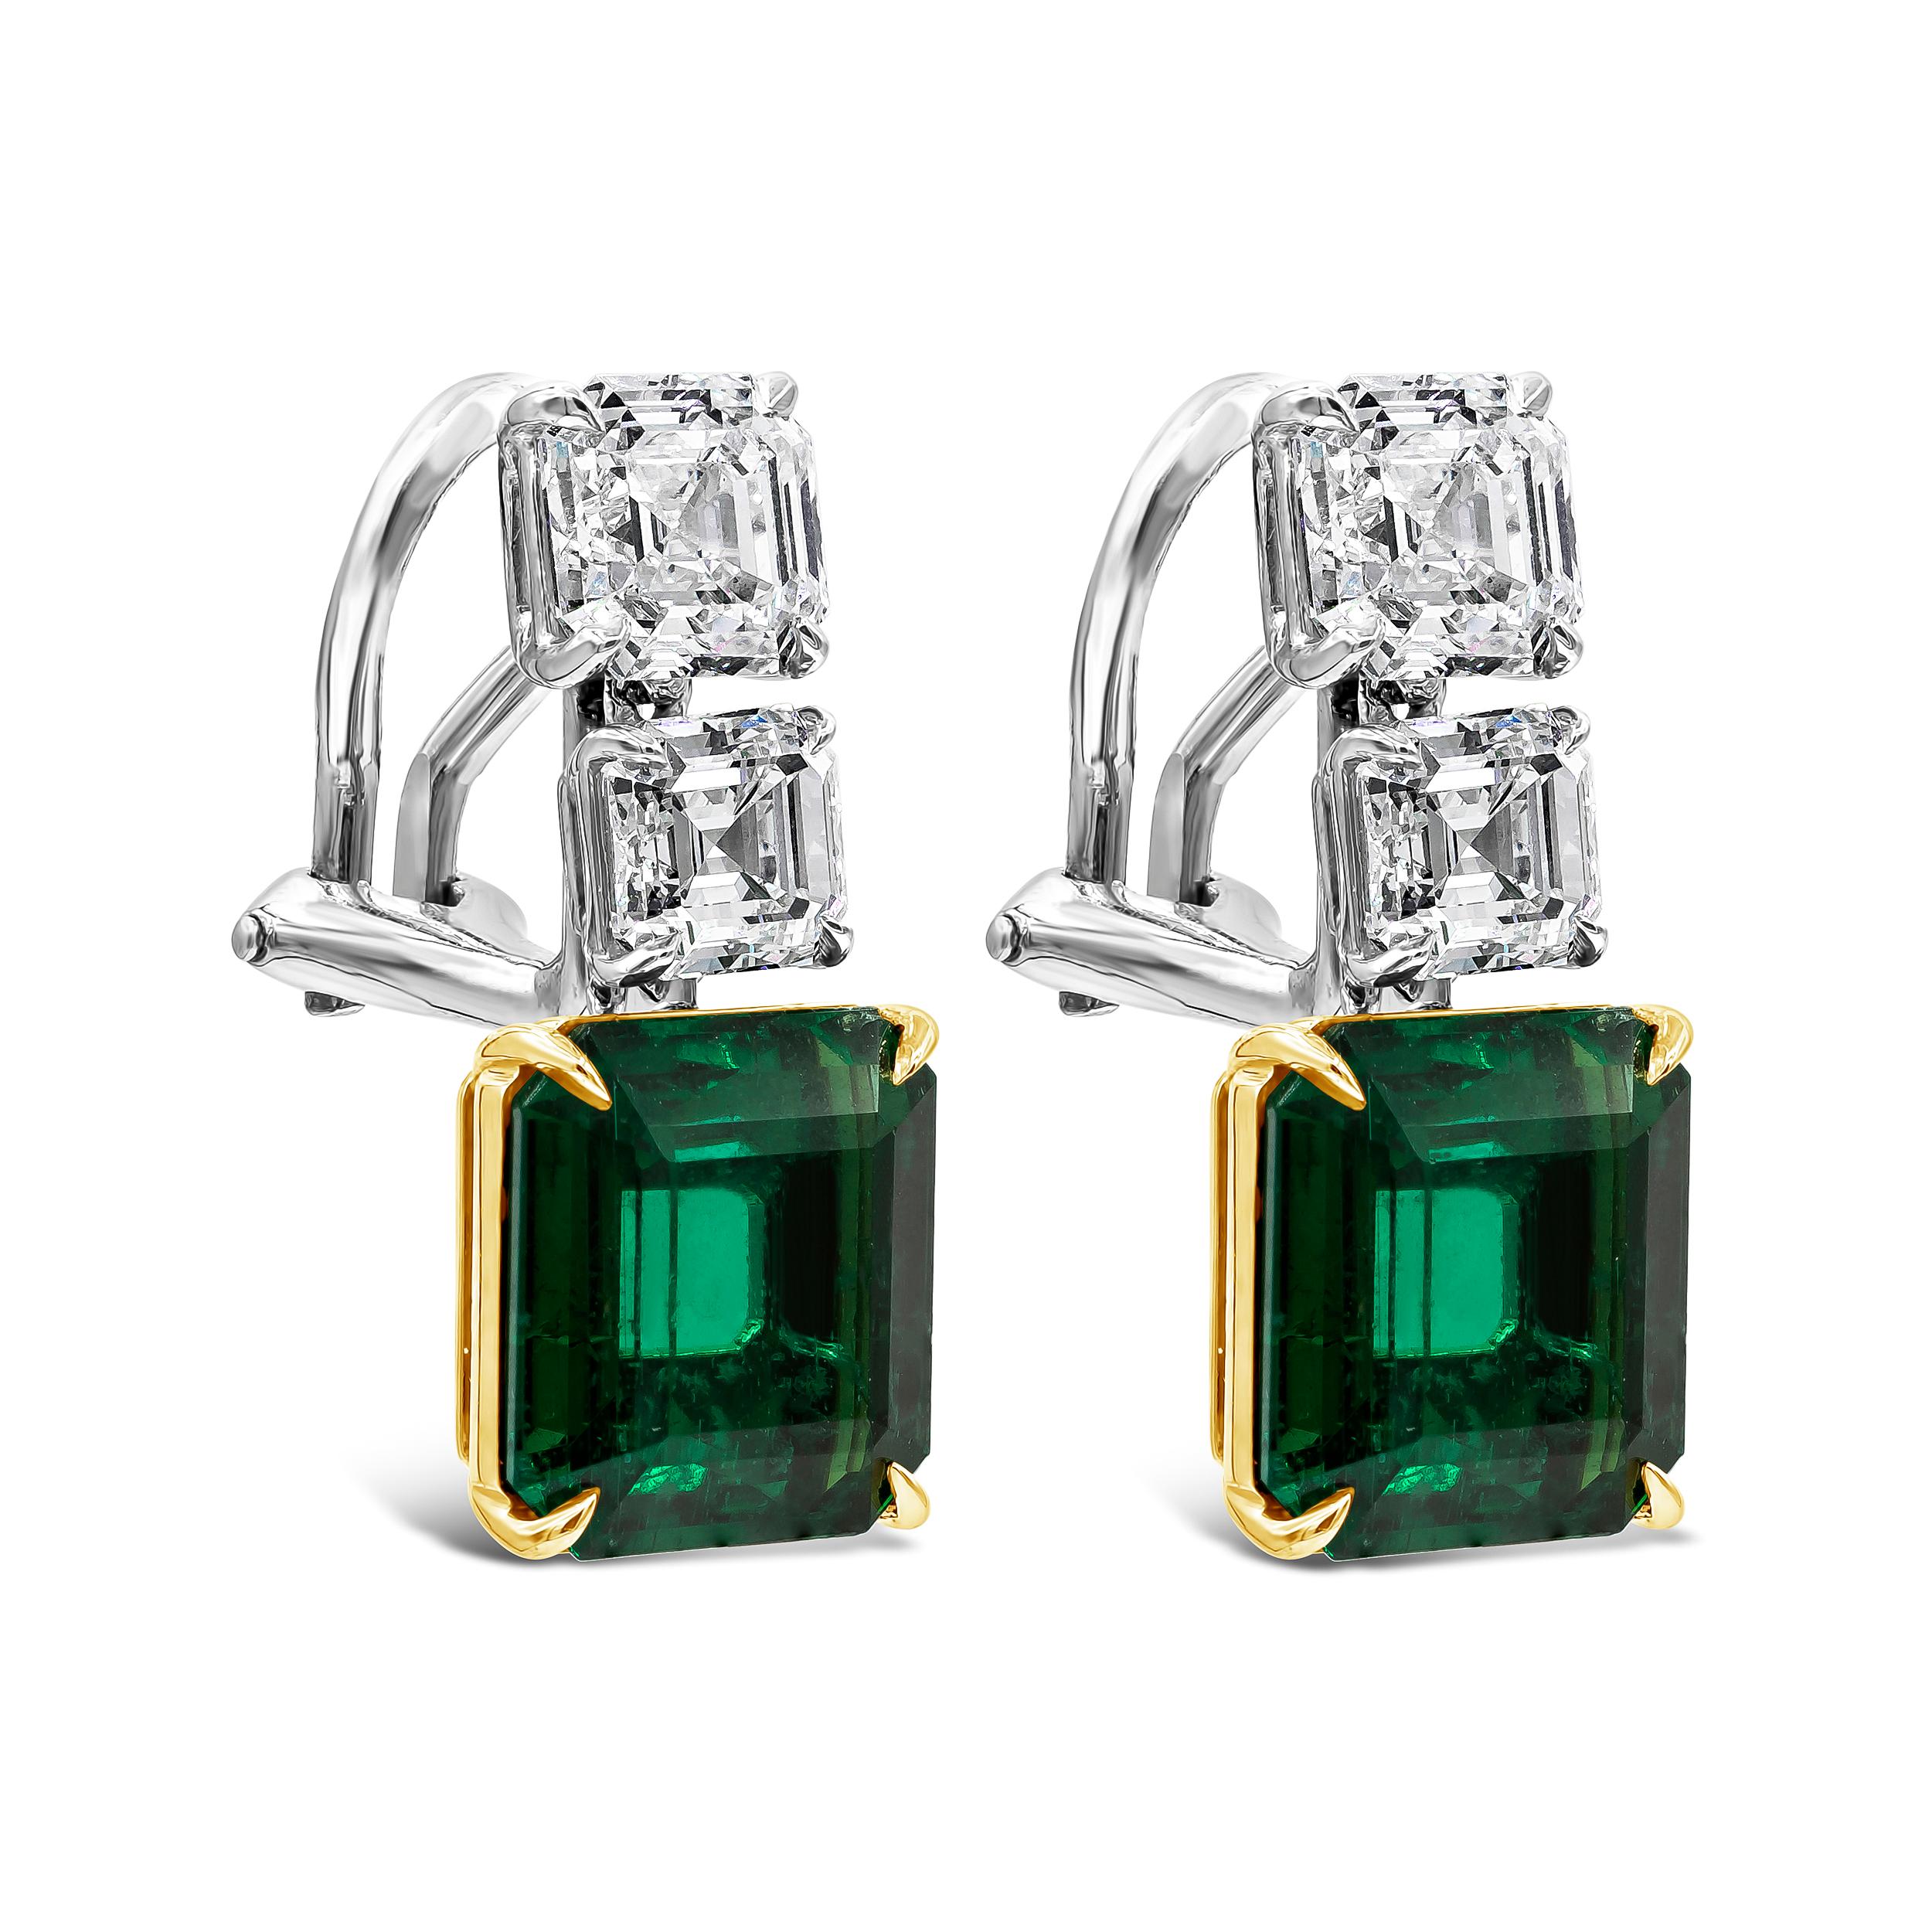 This stunning piece of jewelry features a vibrant step-cut green emeralds weighing 6.49 carats total, accented by four fine quality asscher cut diamonds weighing 3.50 carats total. Diamonds come with a GIA report certifying that the diamonds are E-F